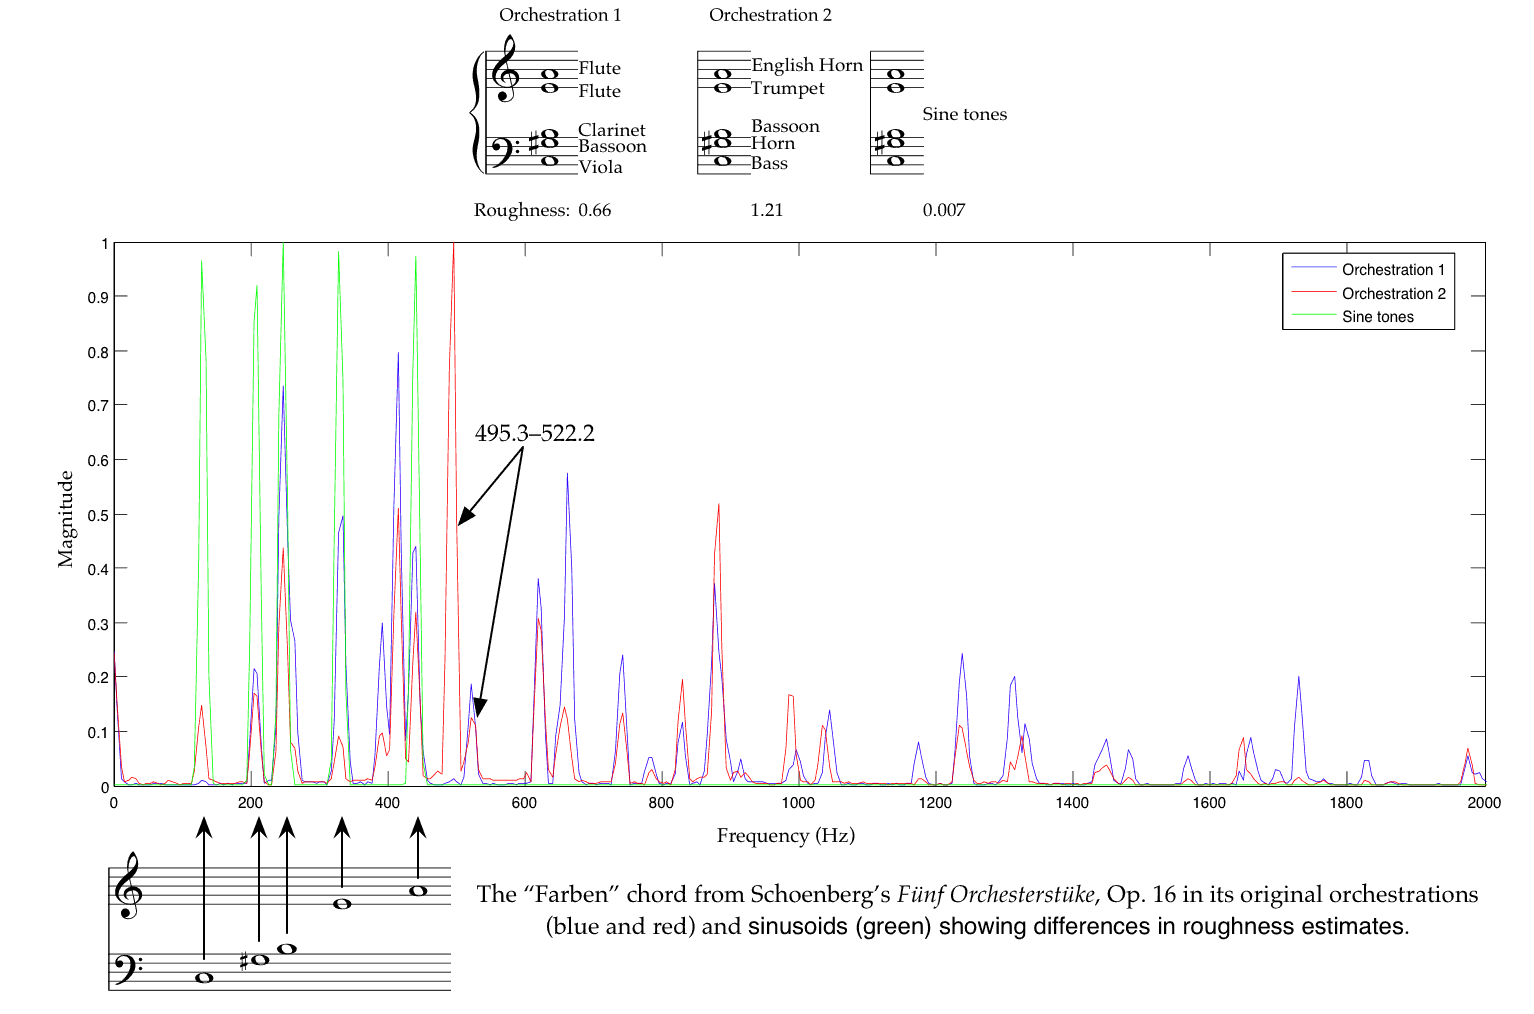 An analysis of the spectra of the two orchestrations of the 'Farben' chord, in comparison with a rendering of pure sinusoids.